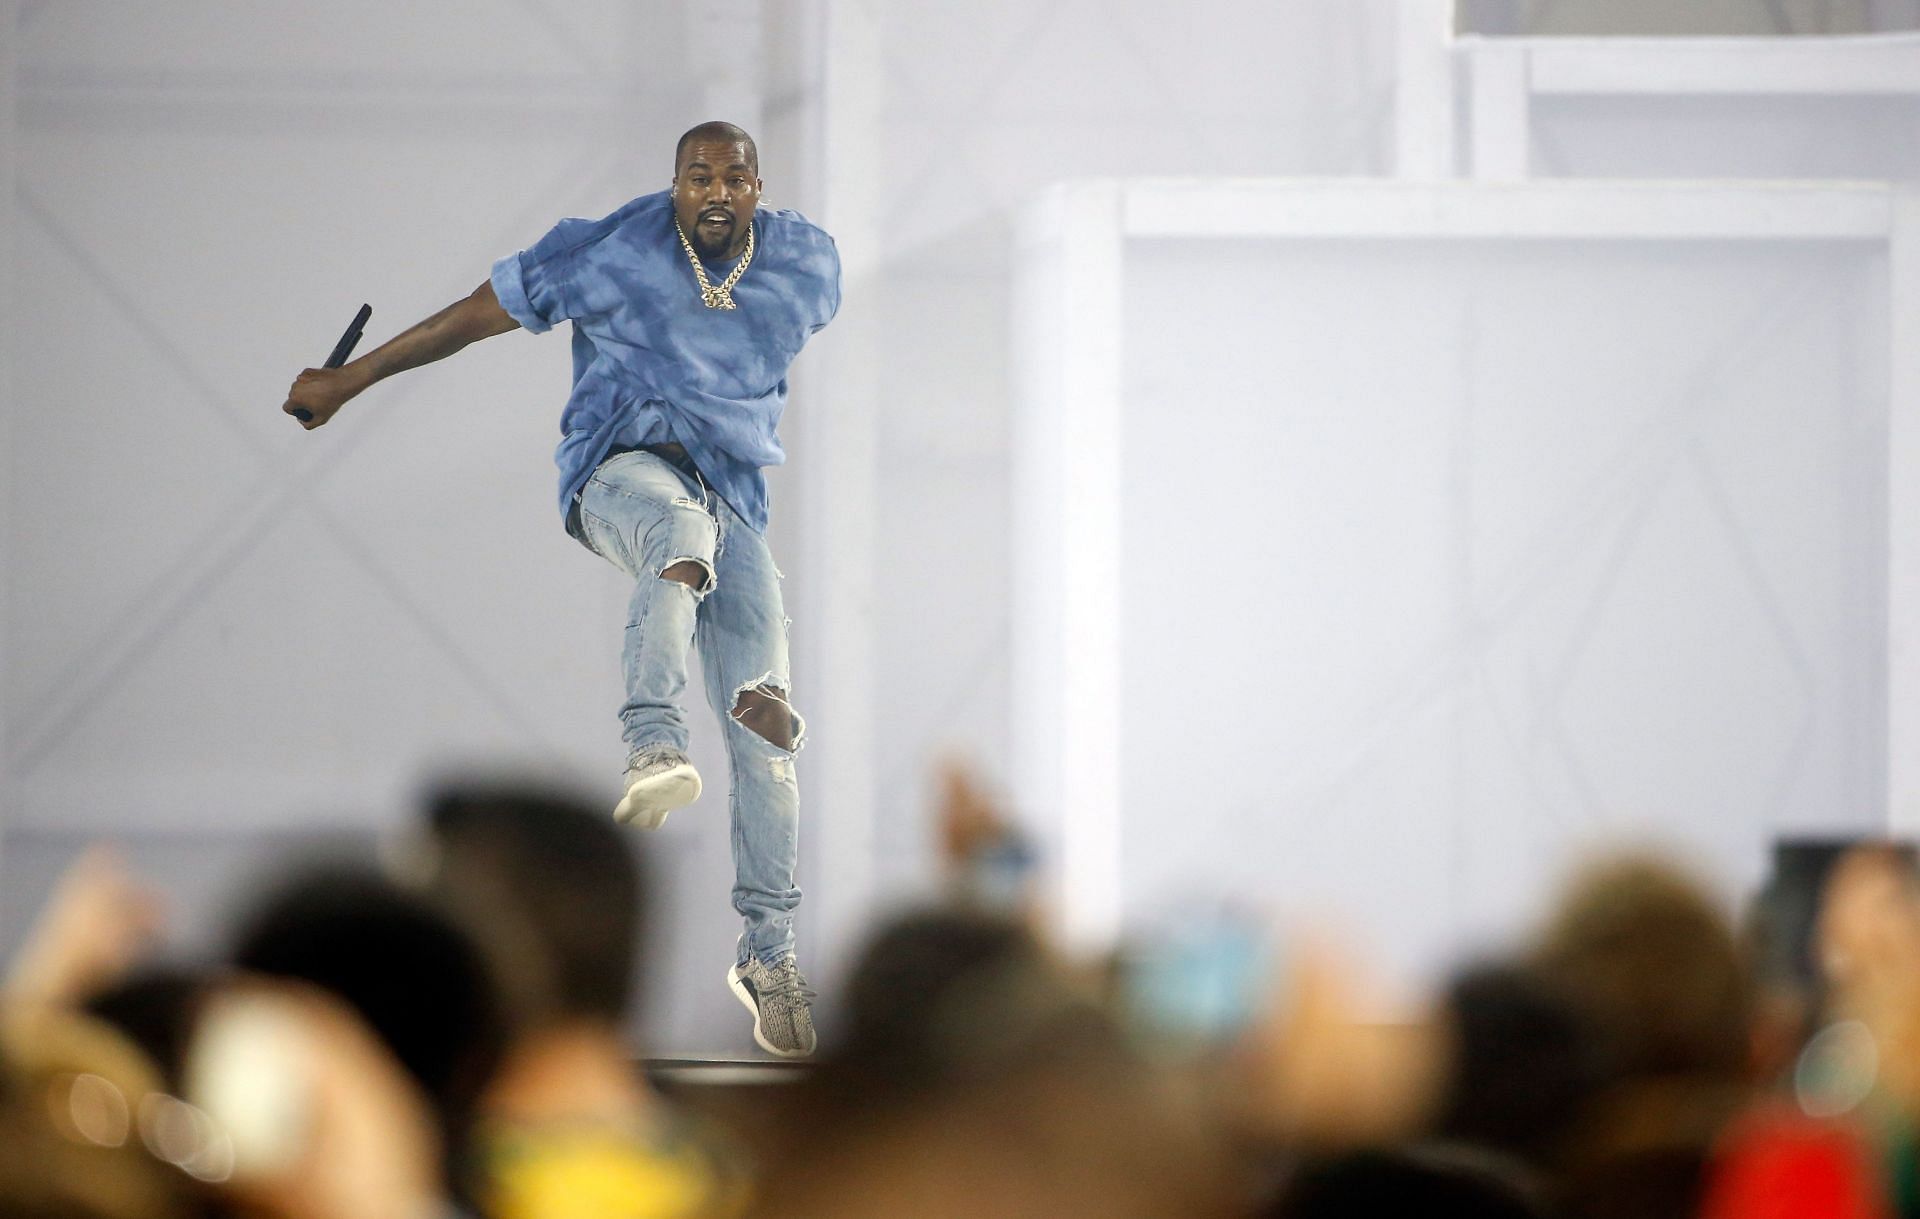 Kanye West preforms at the Toronto 2015 Pan Am Games (Photo by Ezra Shaw/Getty Images)